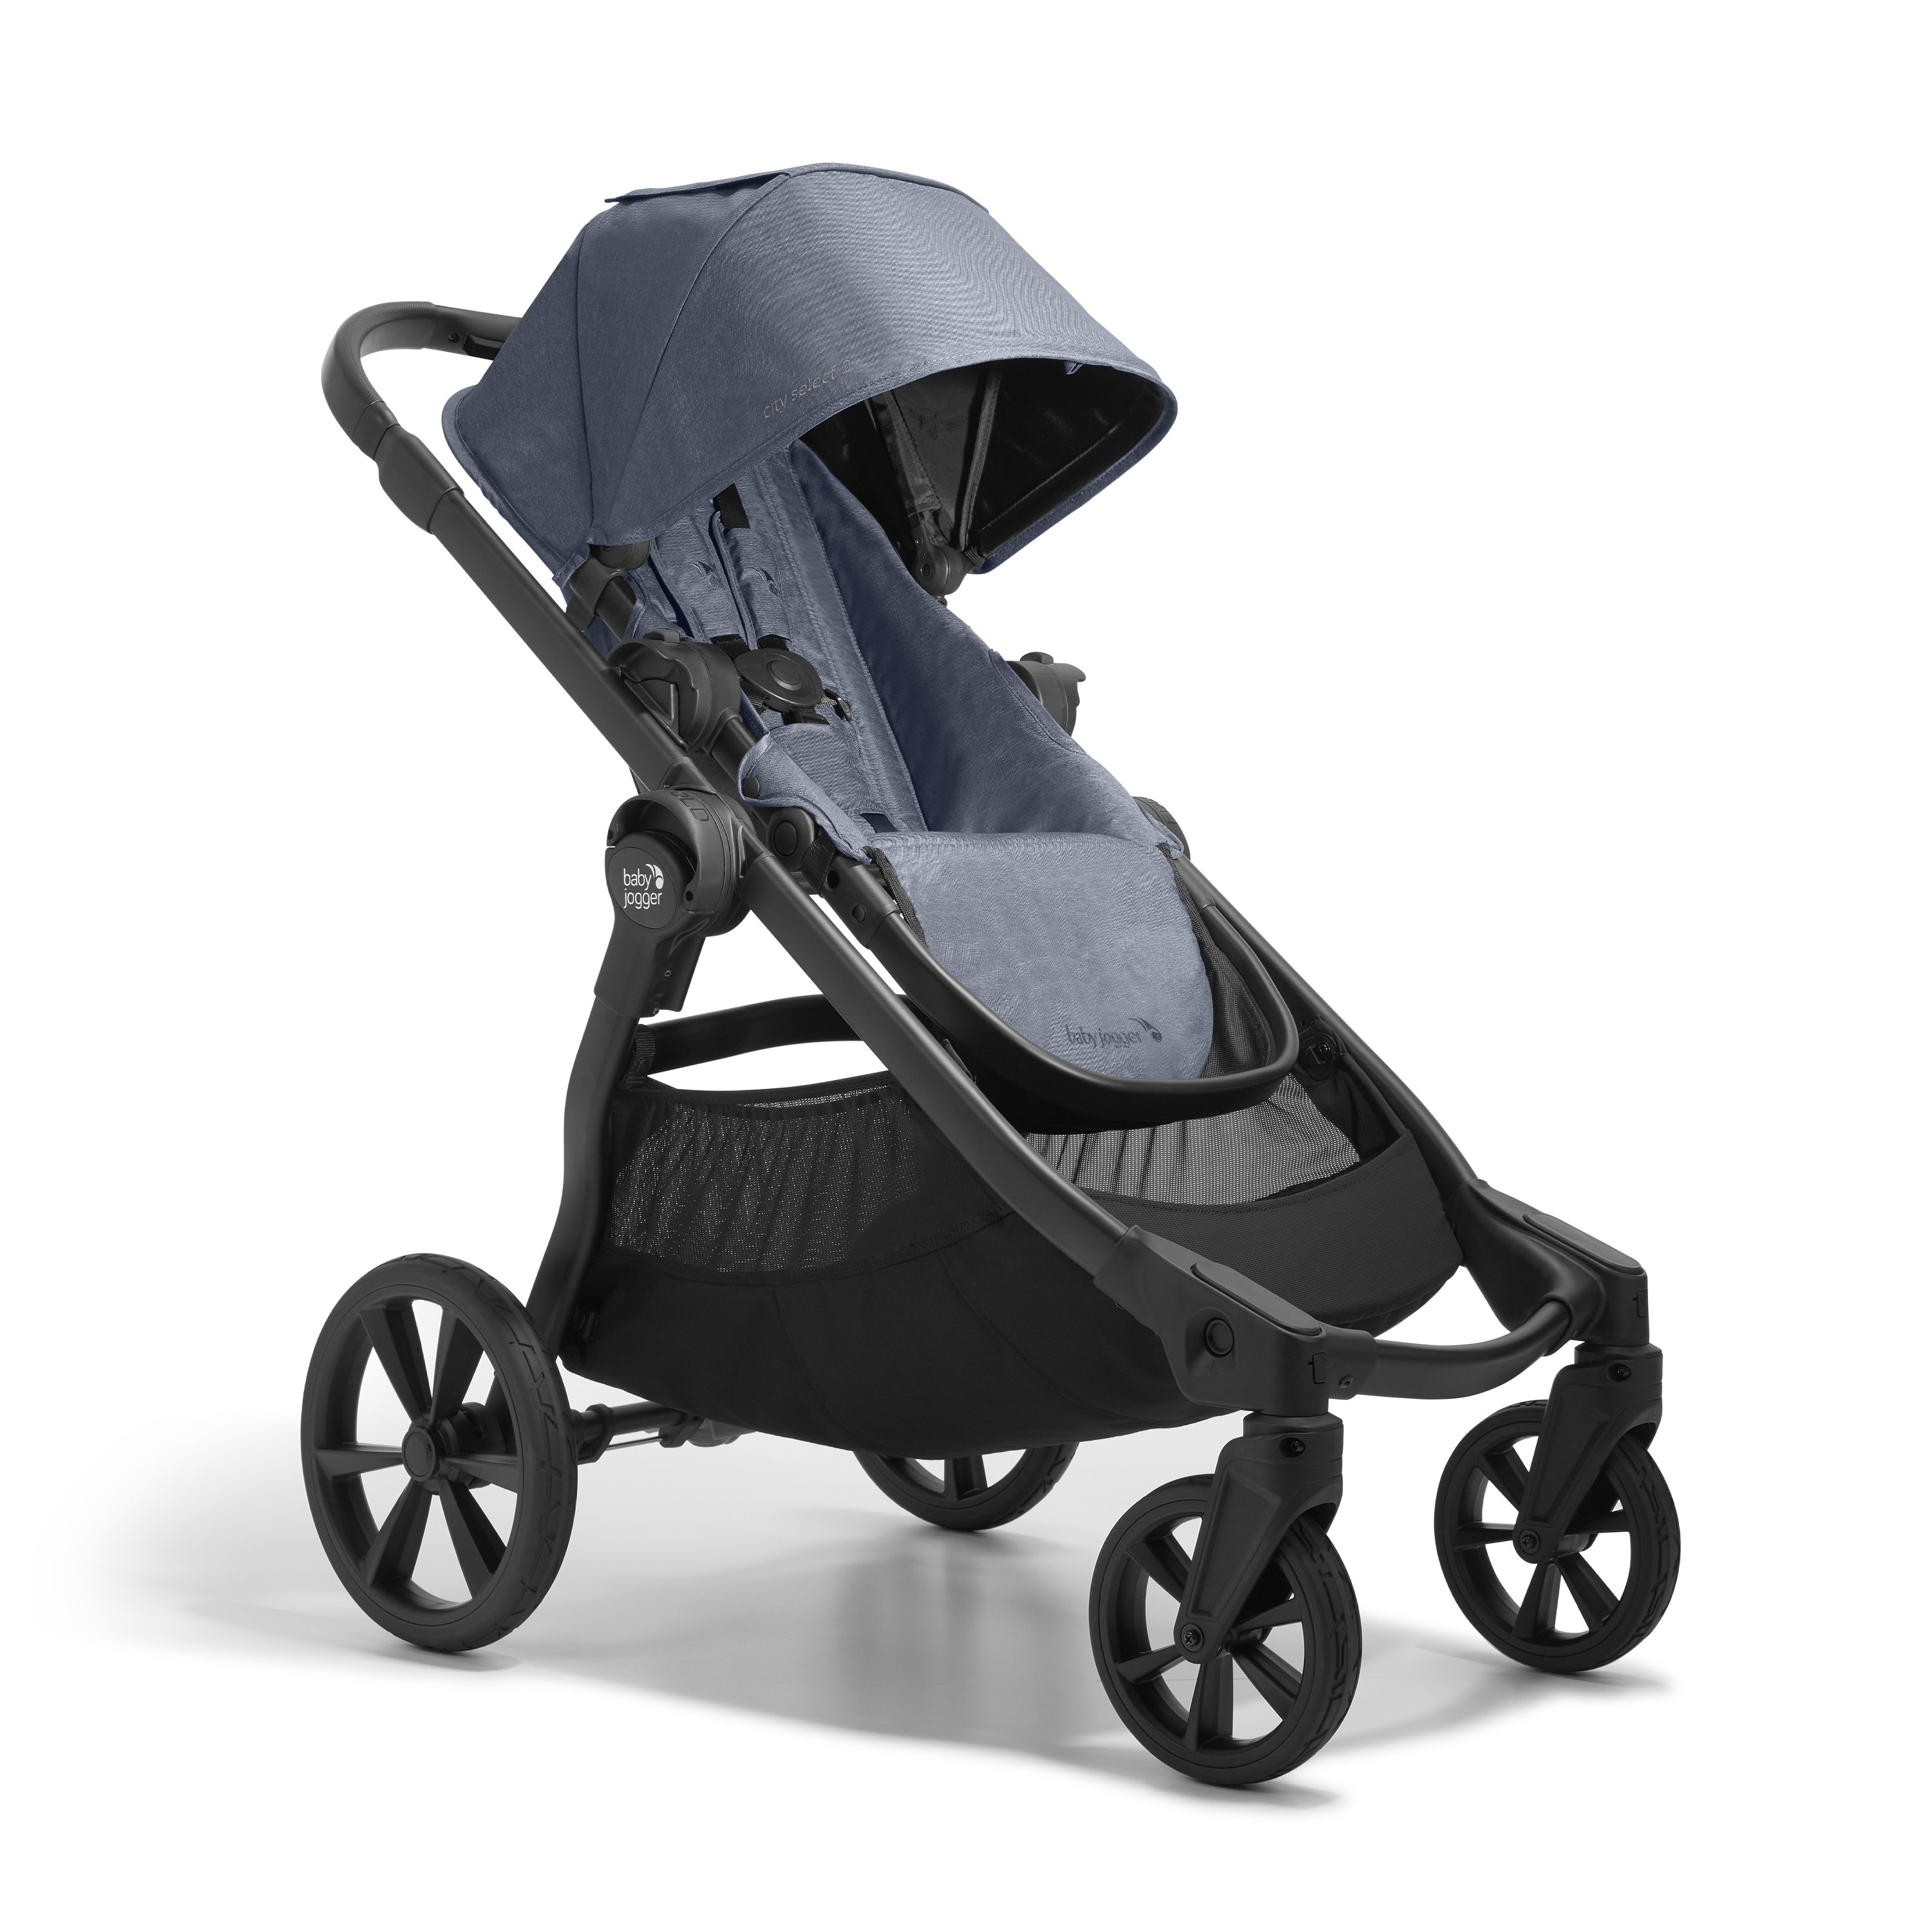 Ironisk sponsoreret parade Baby Jogger city select® 2 stroller | Baby Jogger